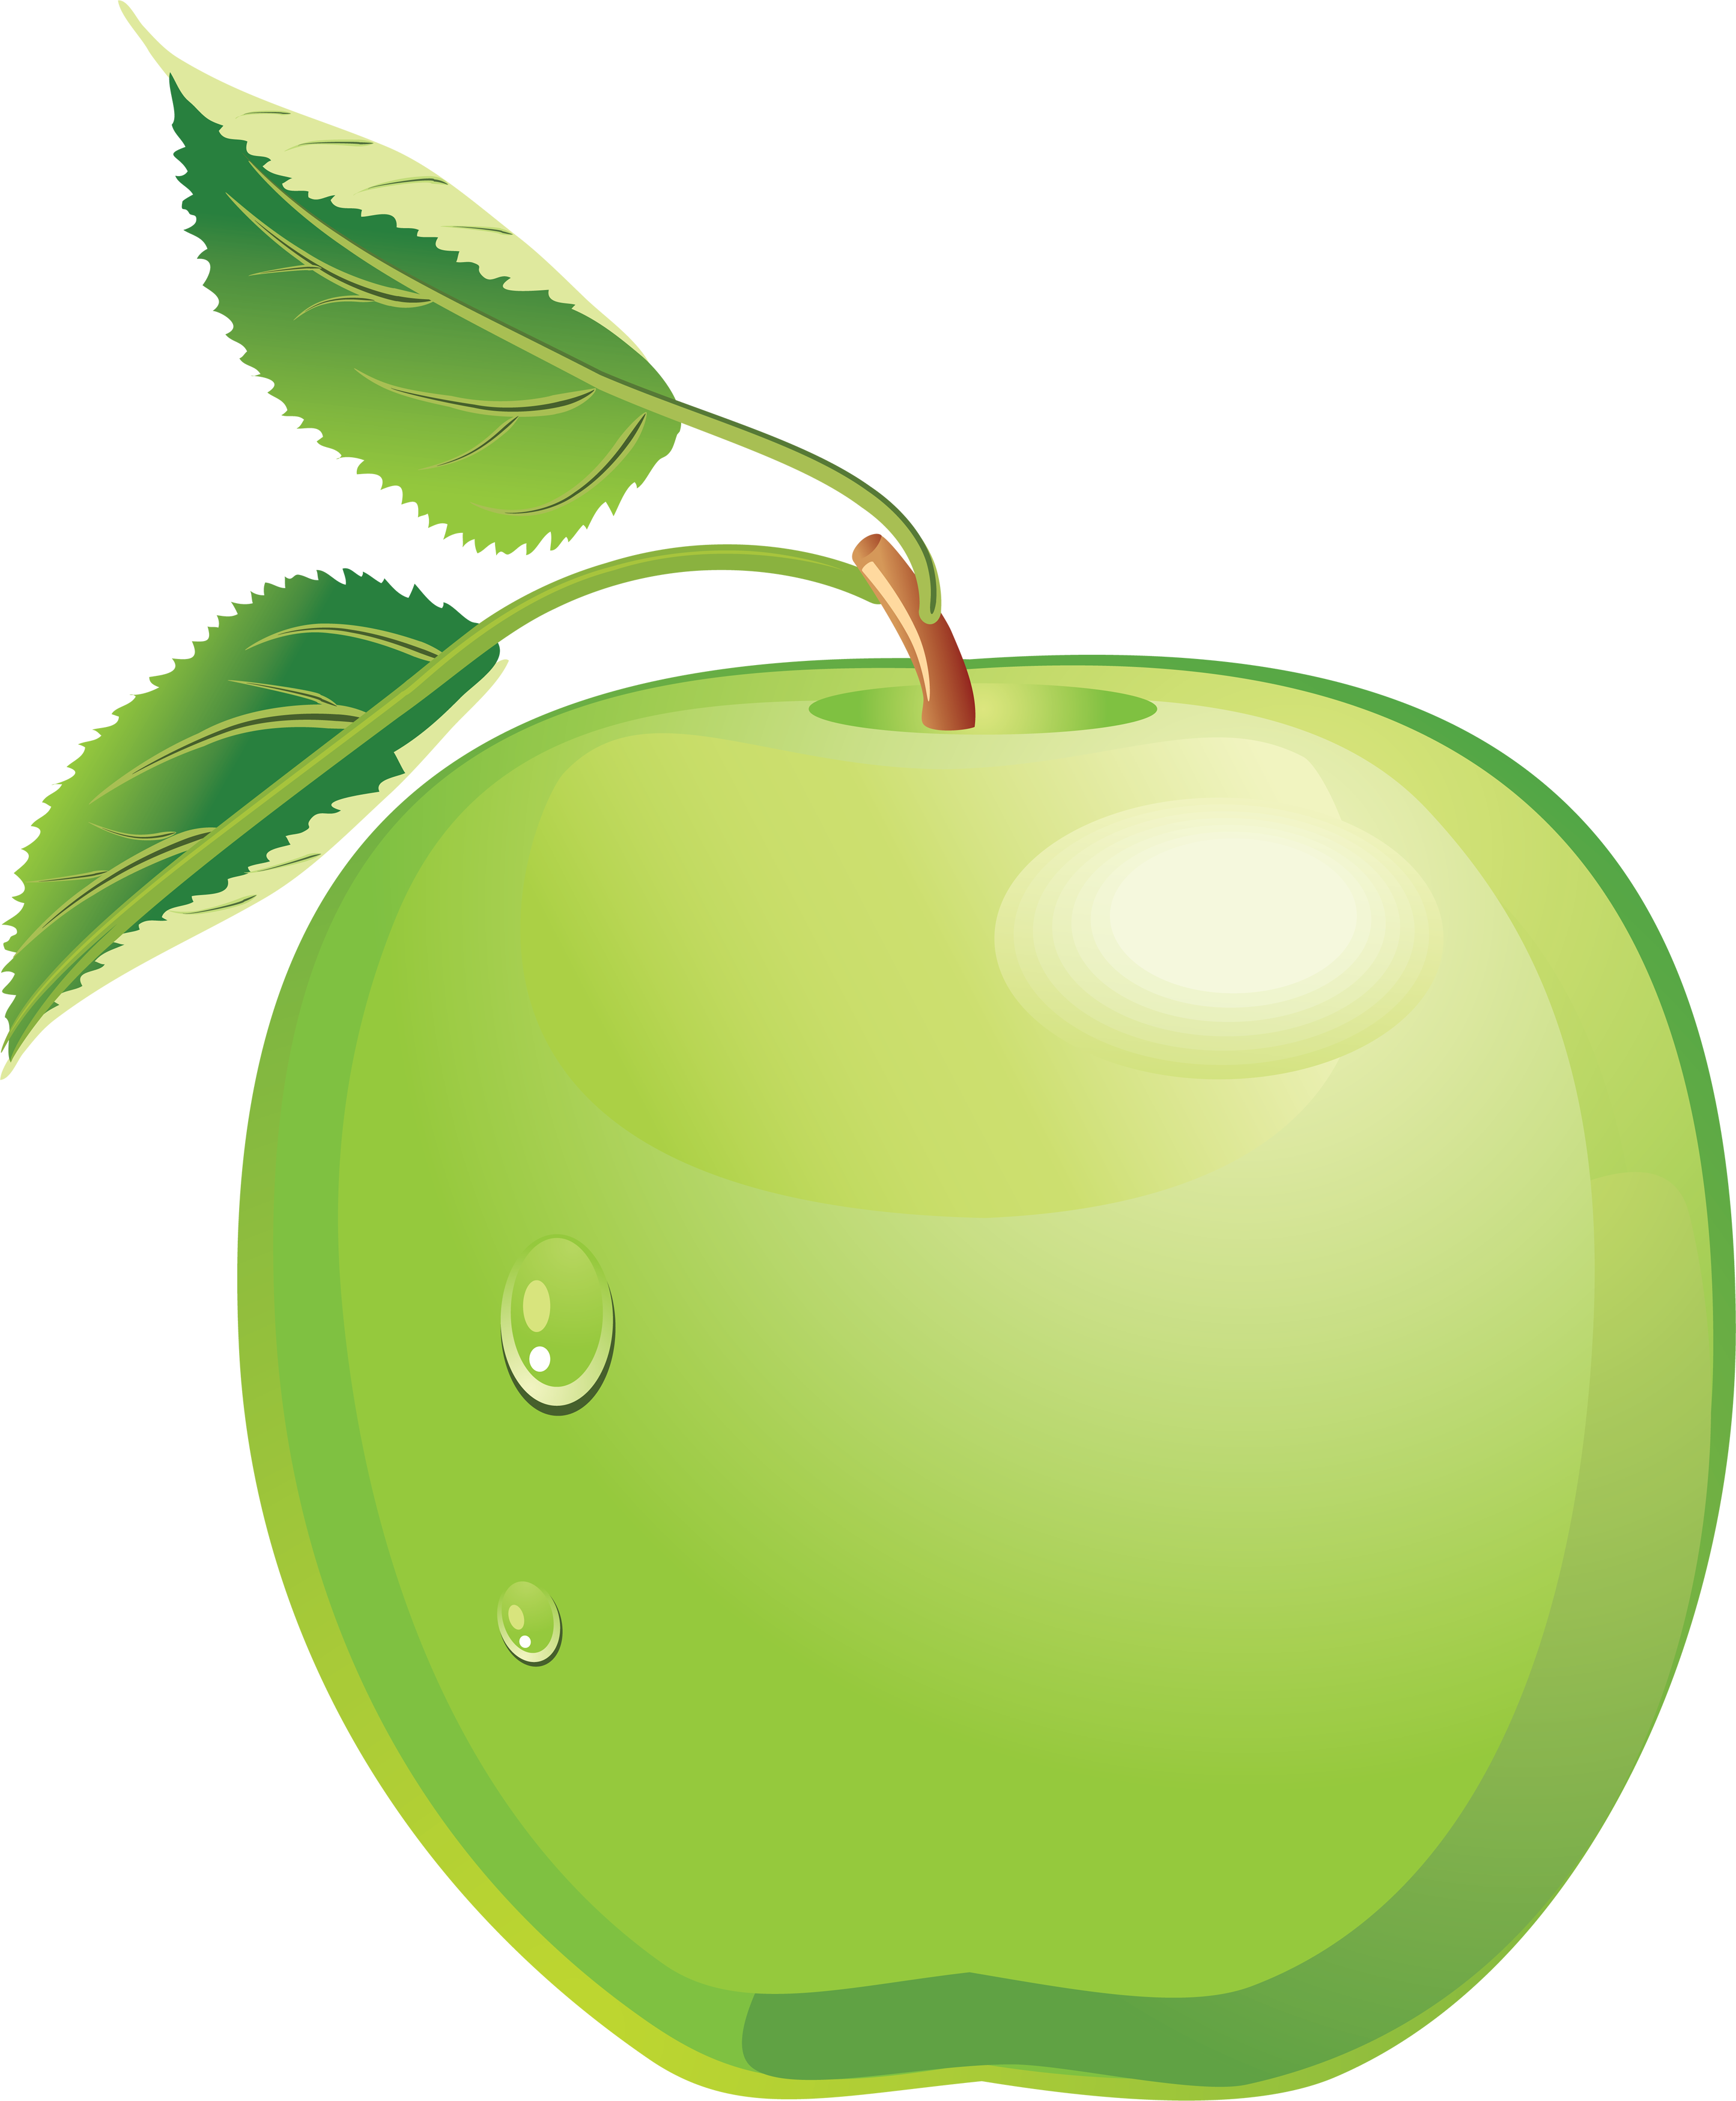 green apple clipart free - photo #28